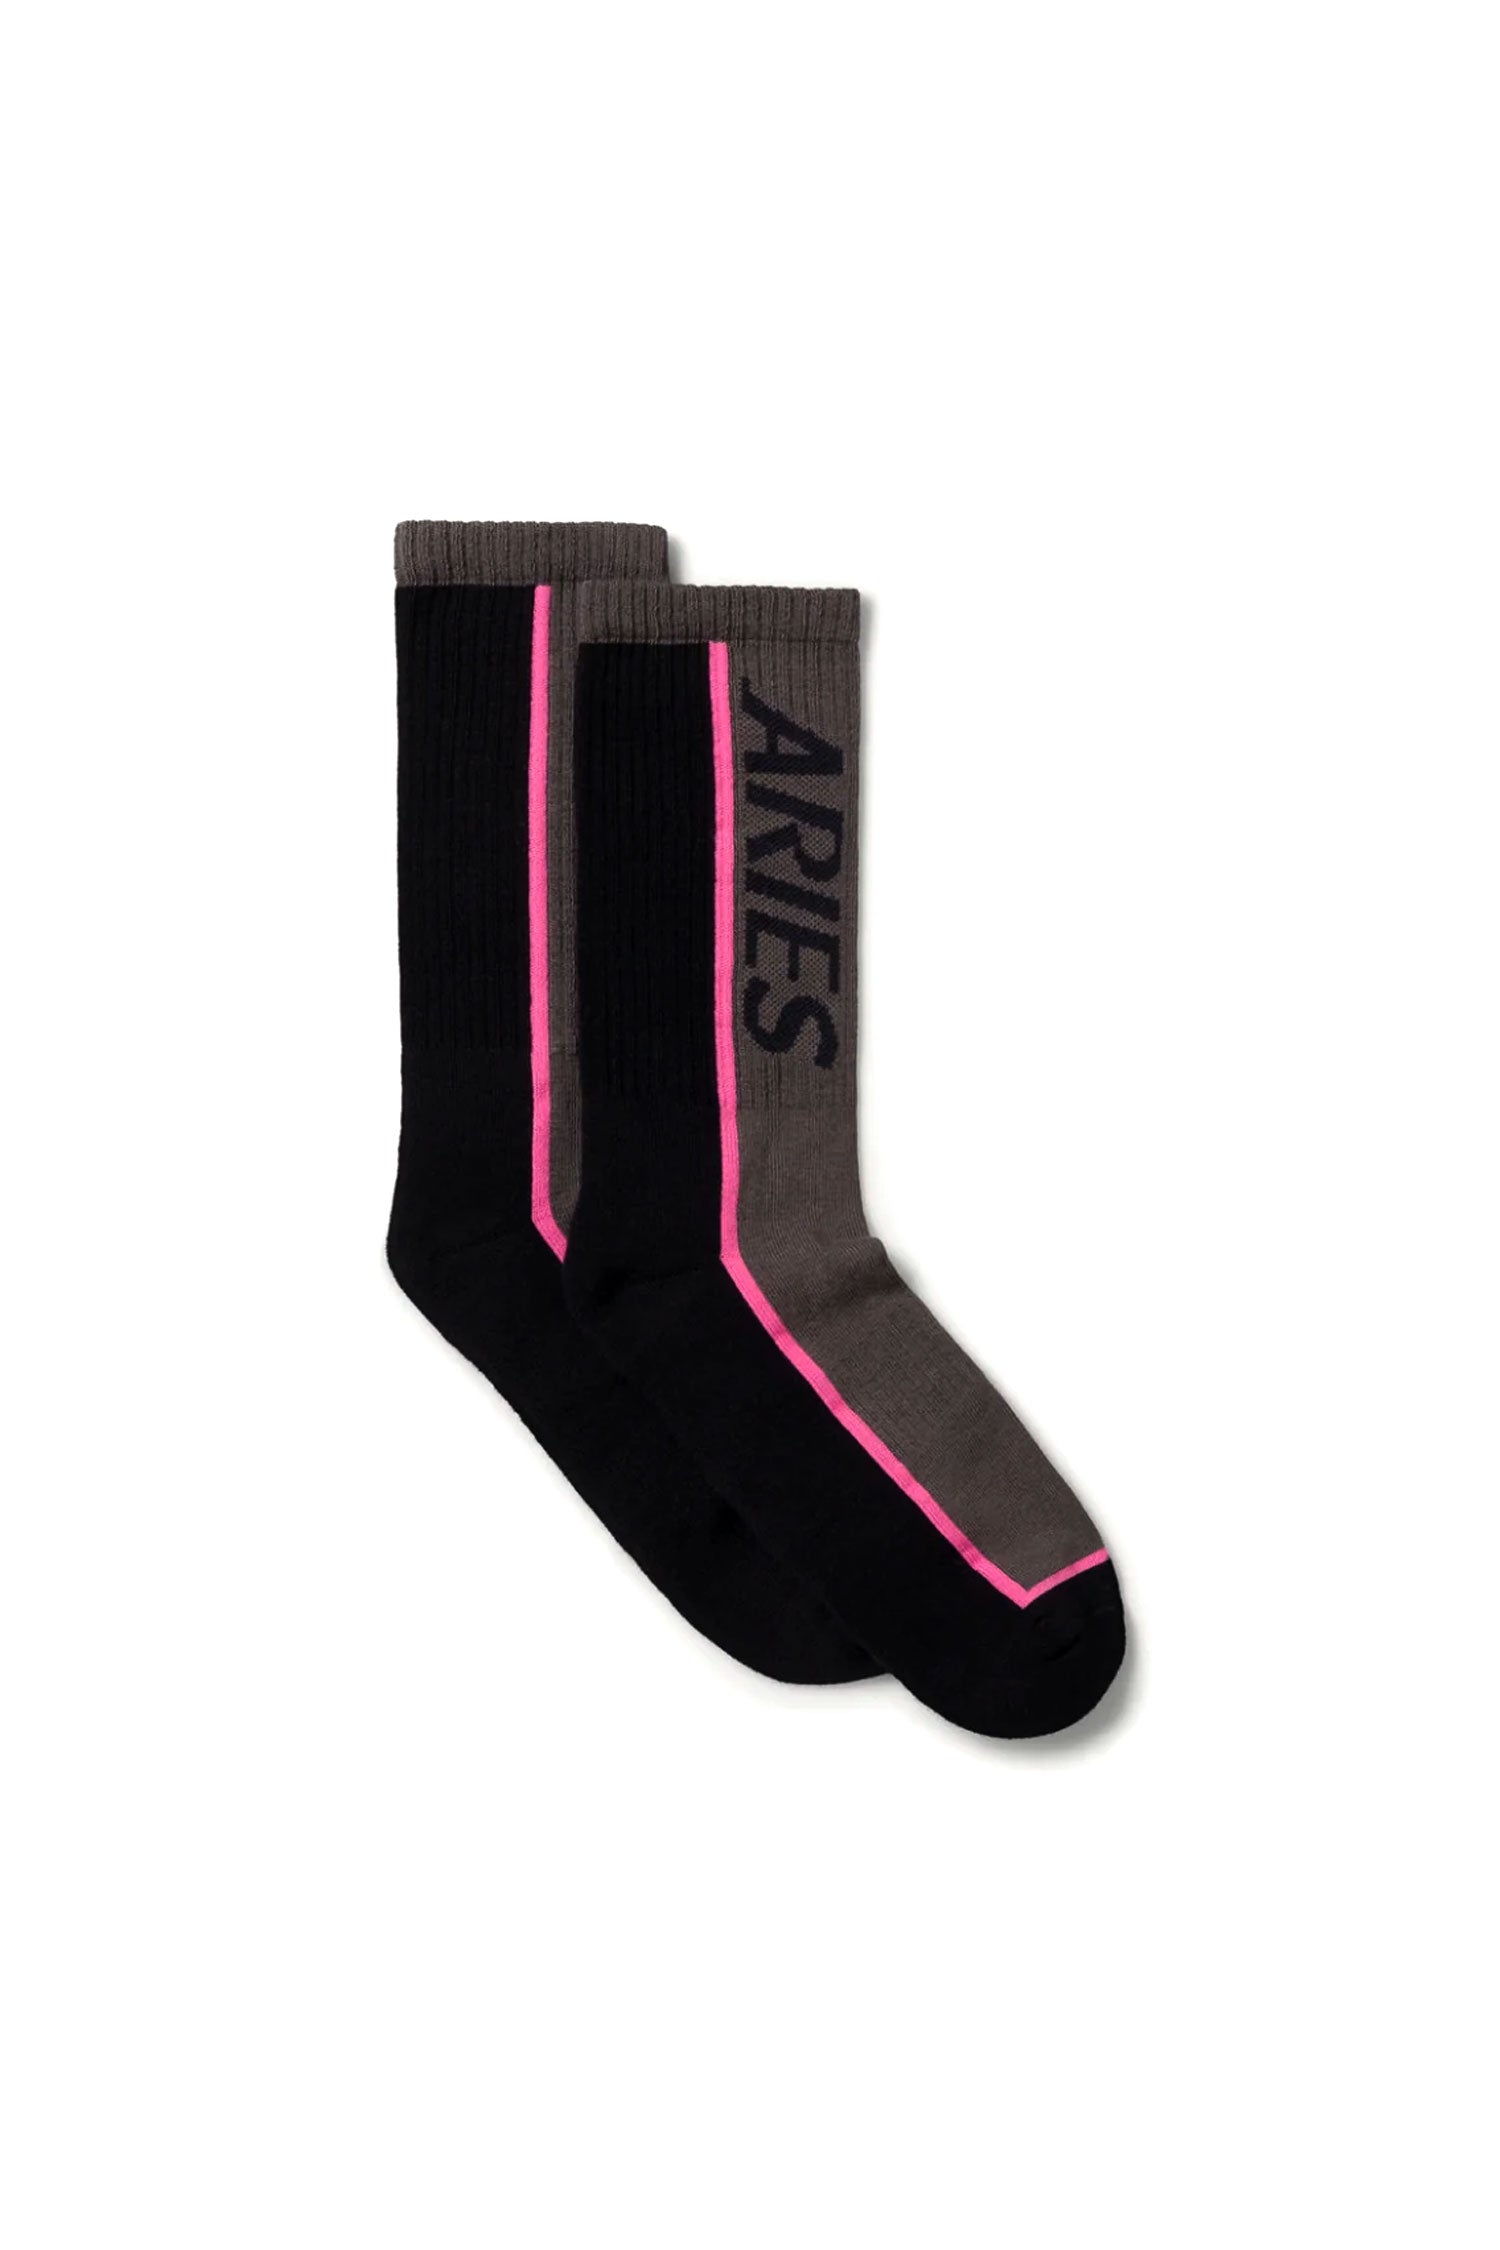 The ARIES - SS24 CREDIT CARD SOCK BLACK available online with global shipping, and in PAM Stores Melbourne and Sydney.